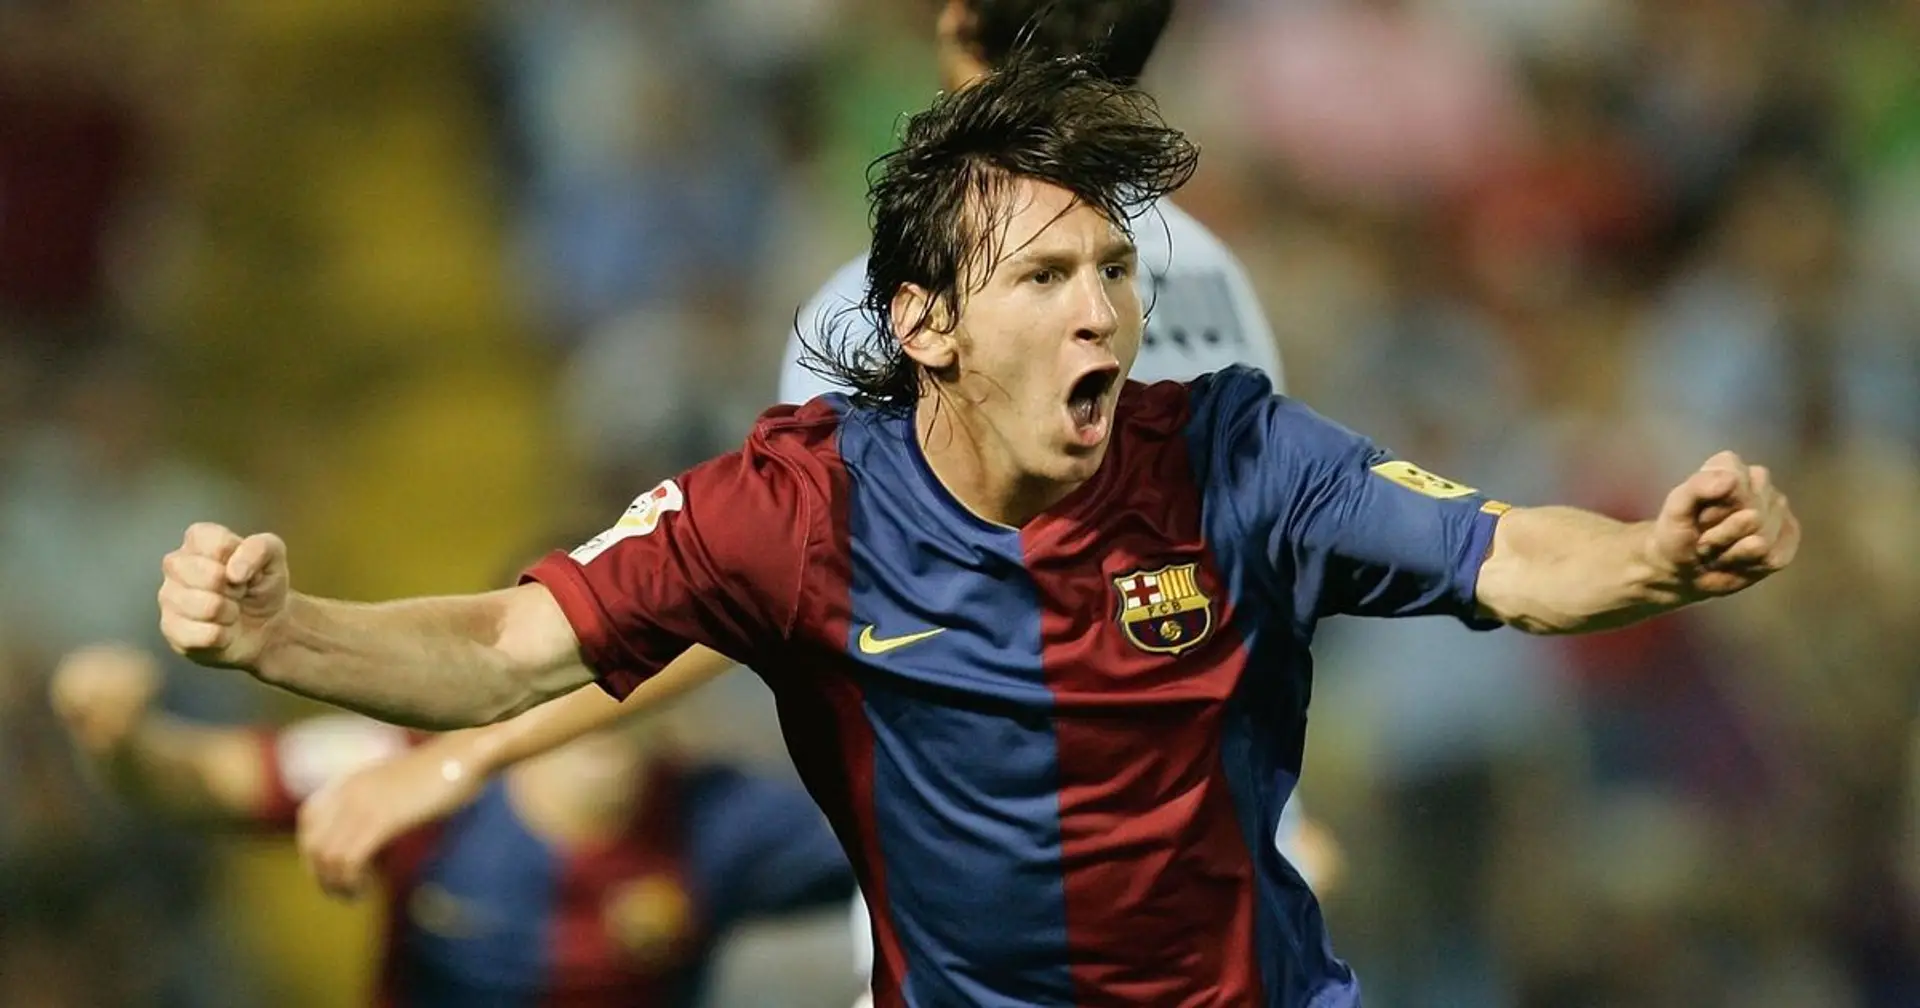 'There are players here who hate them more than Real Madrid': throwback to Messi's incredible 2006 Chelsea comments